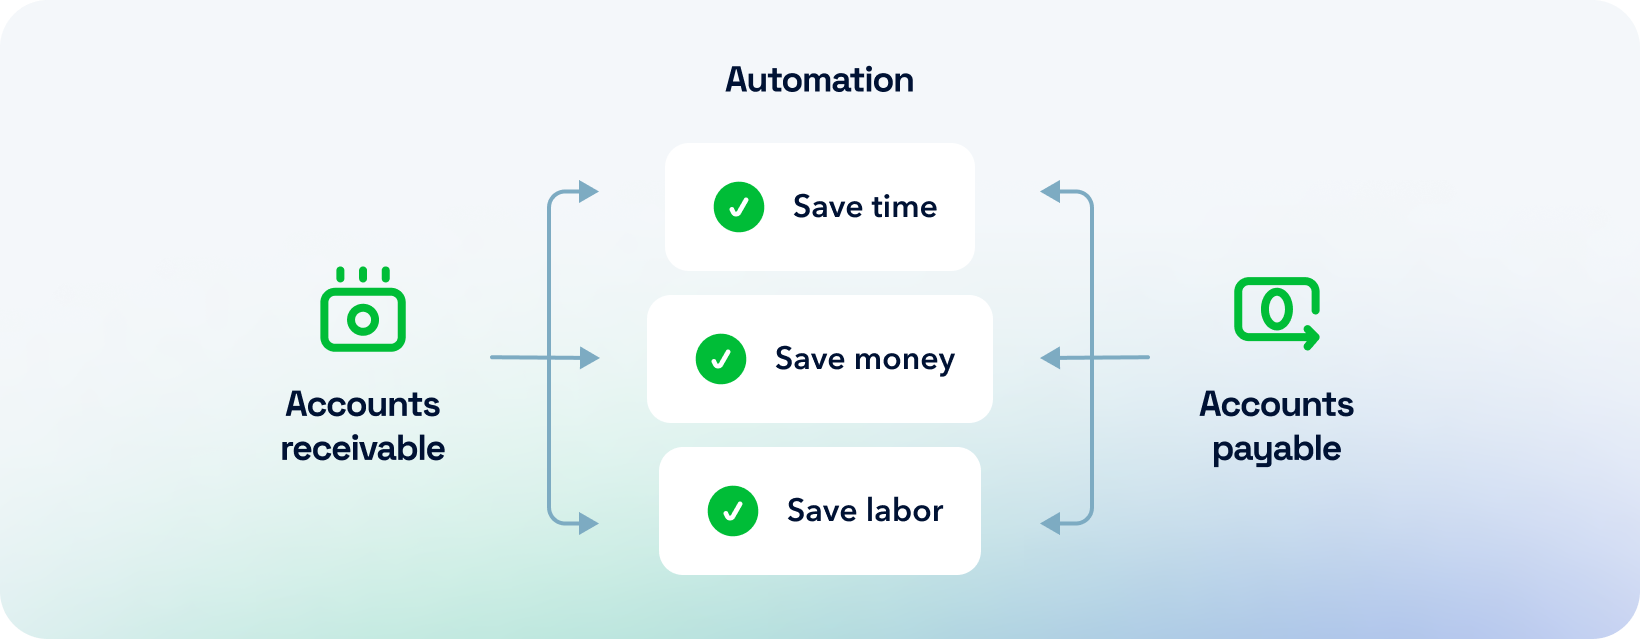 Both AR and AP automation save time, save money, and save labor